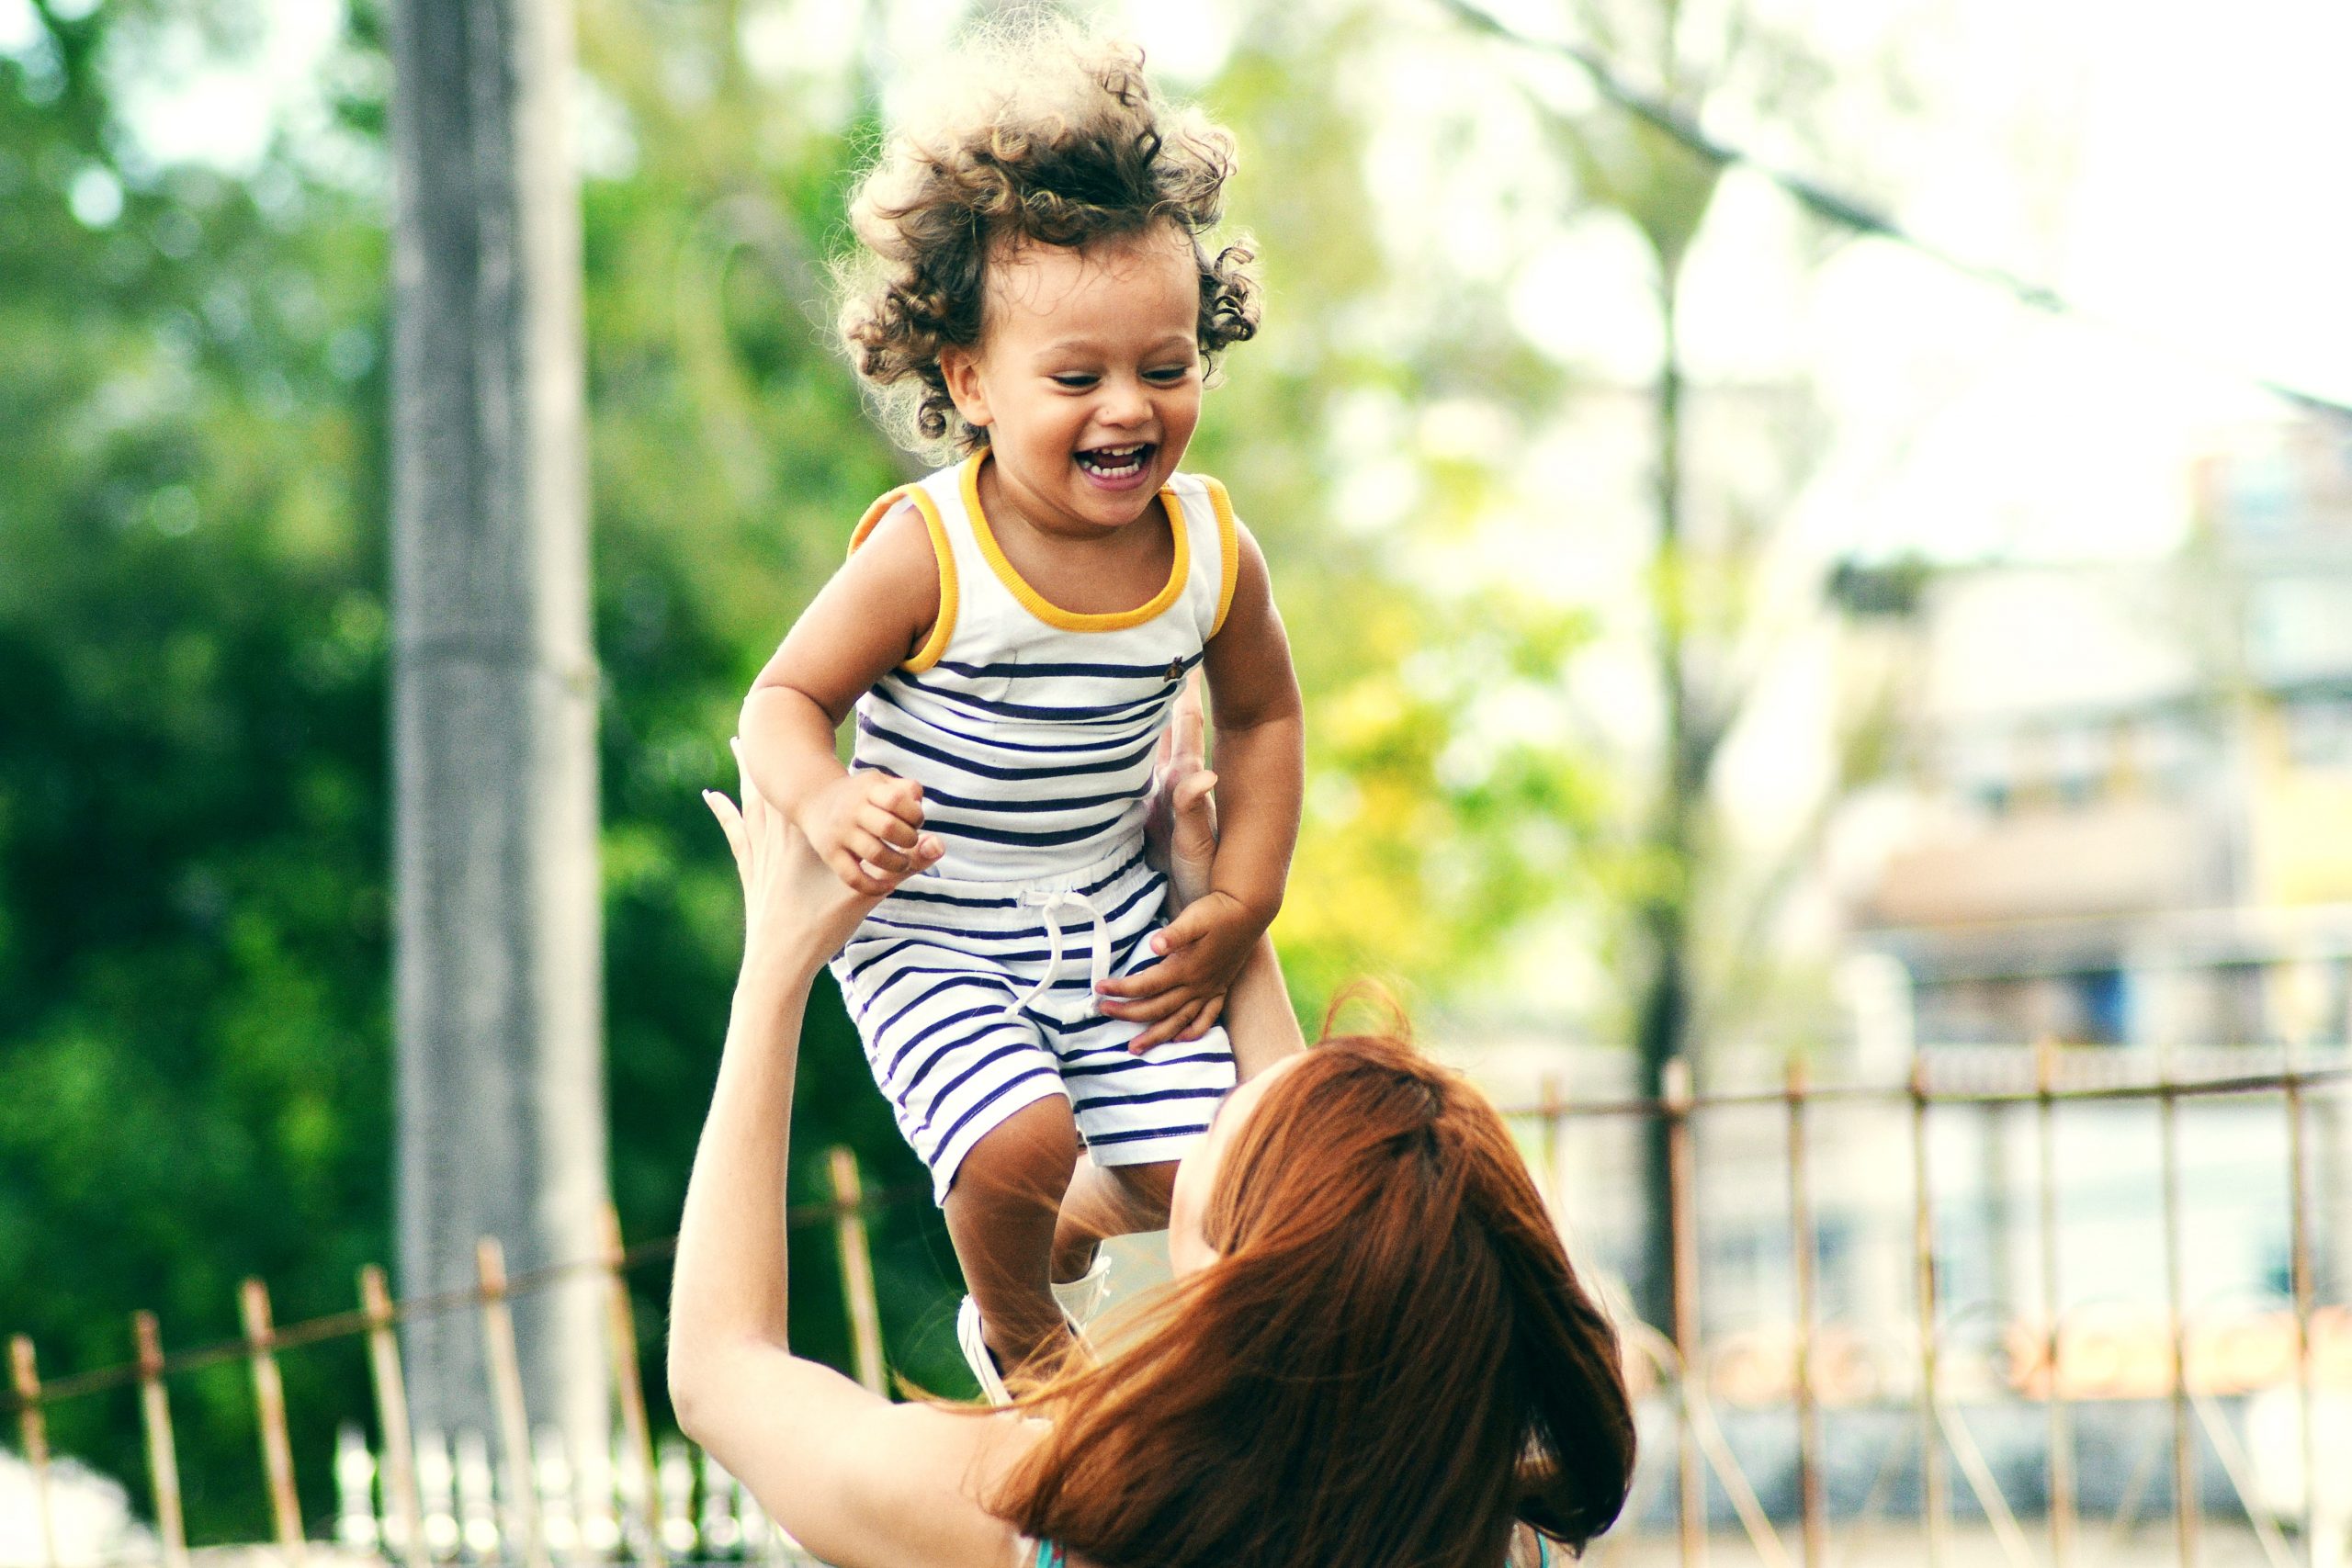 Best and Worst States for Working Moms